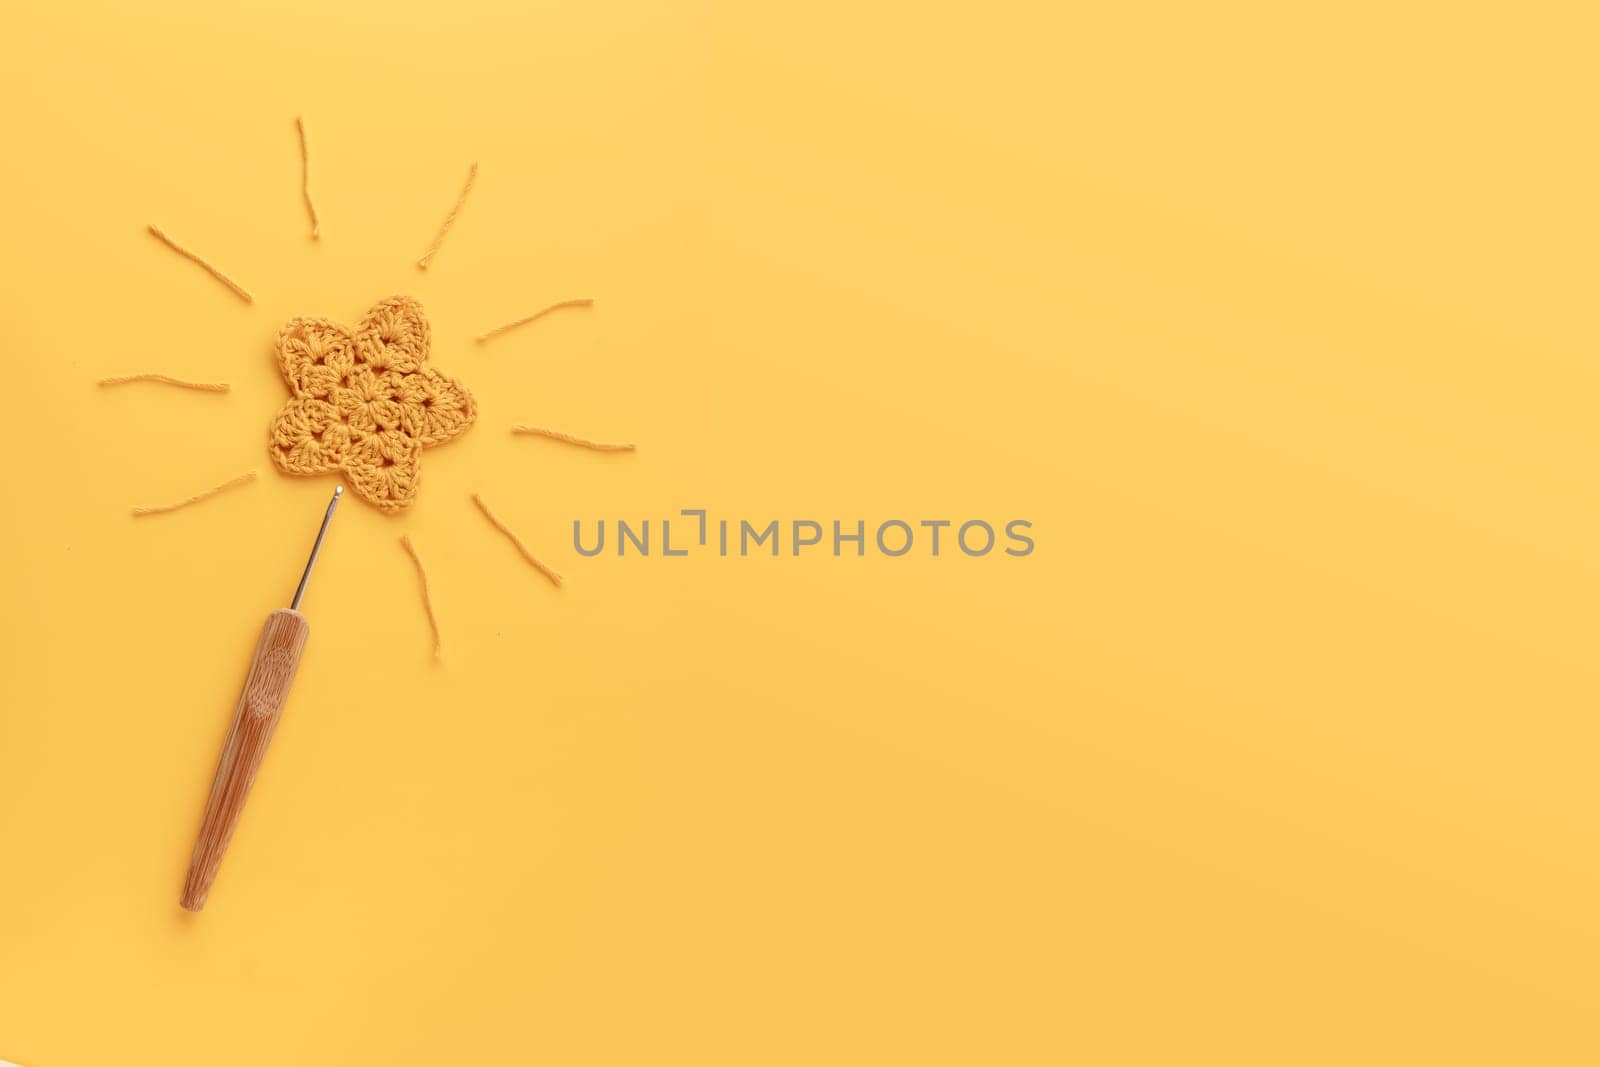 Magic wand - The yellow crocheted star on a yellow background with copy space